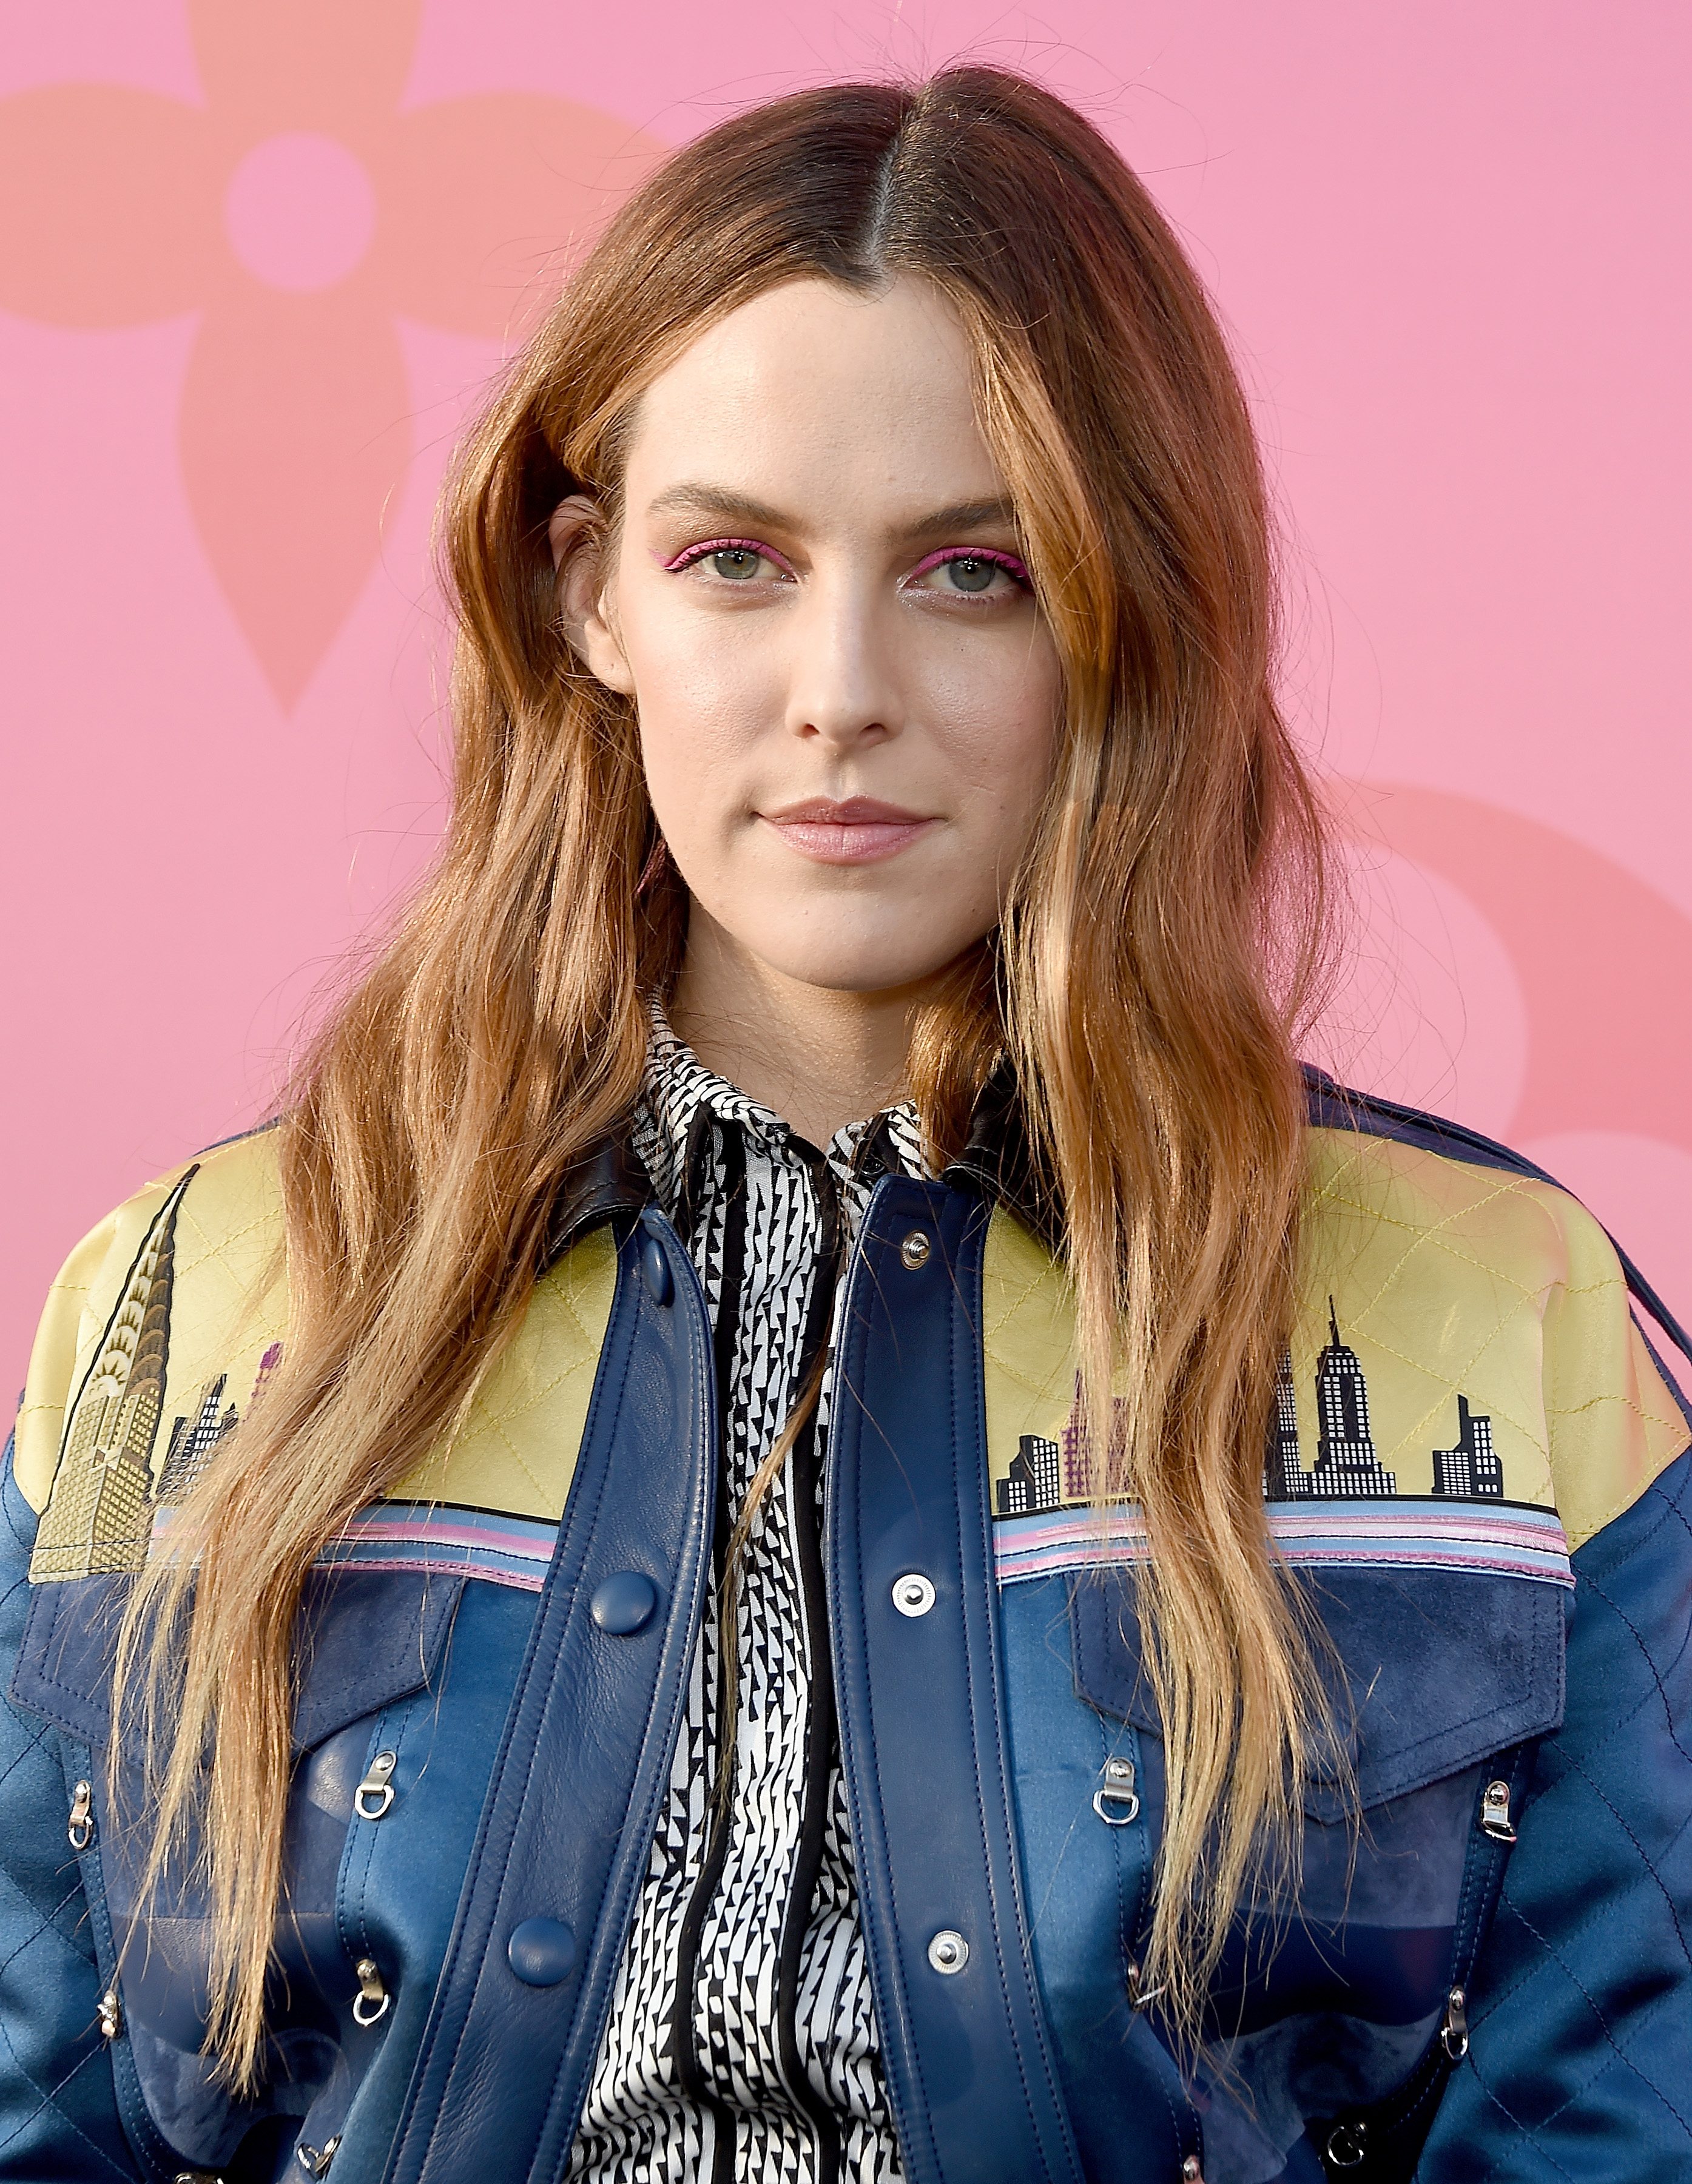 Riley Keough at the “Louis Vuitton Unveils Louis Vuitton X: An Immersive Journey” event in Beverly Hills, California, in June 2019.